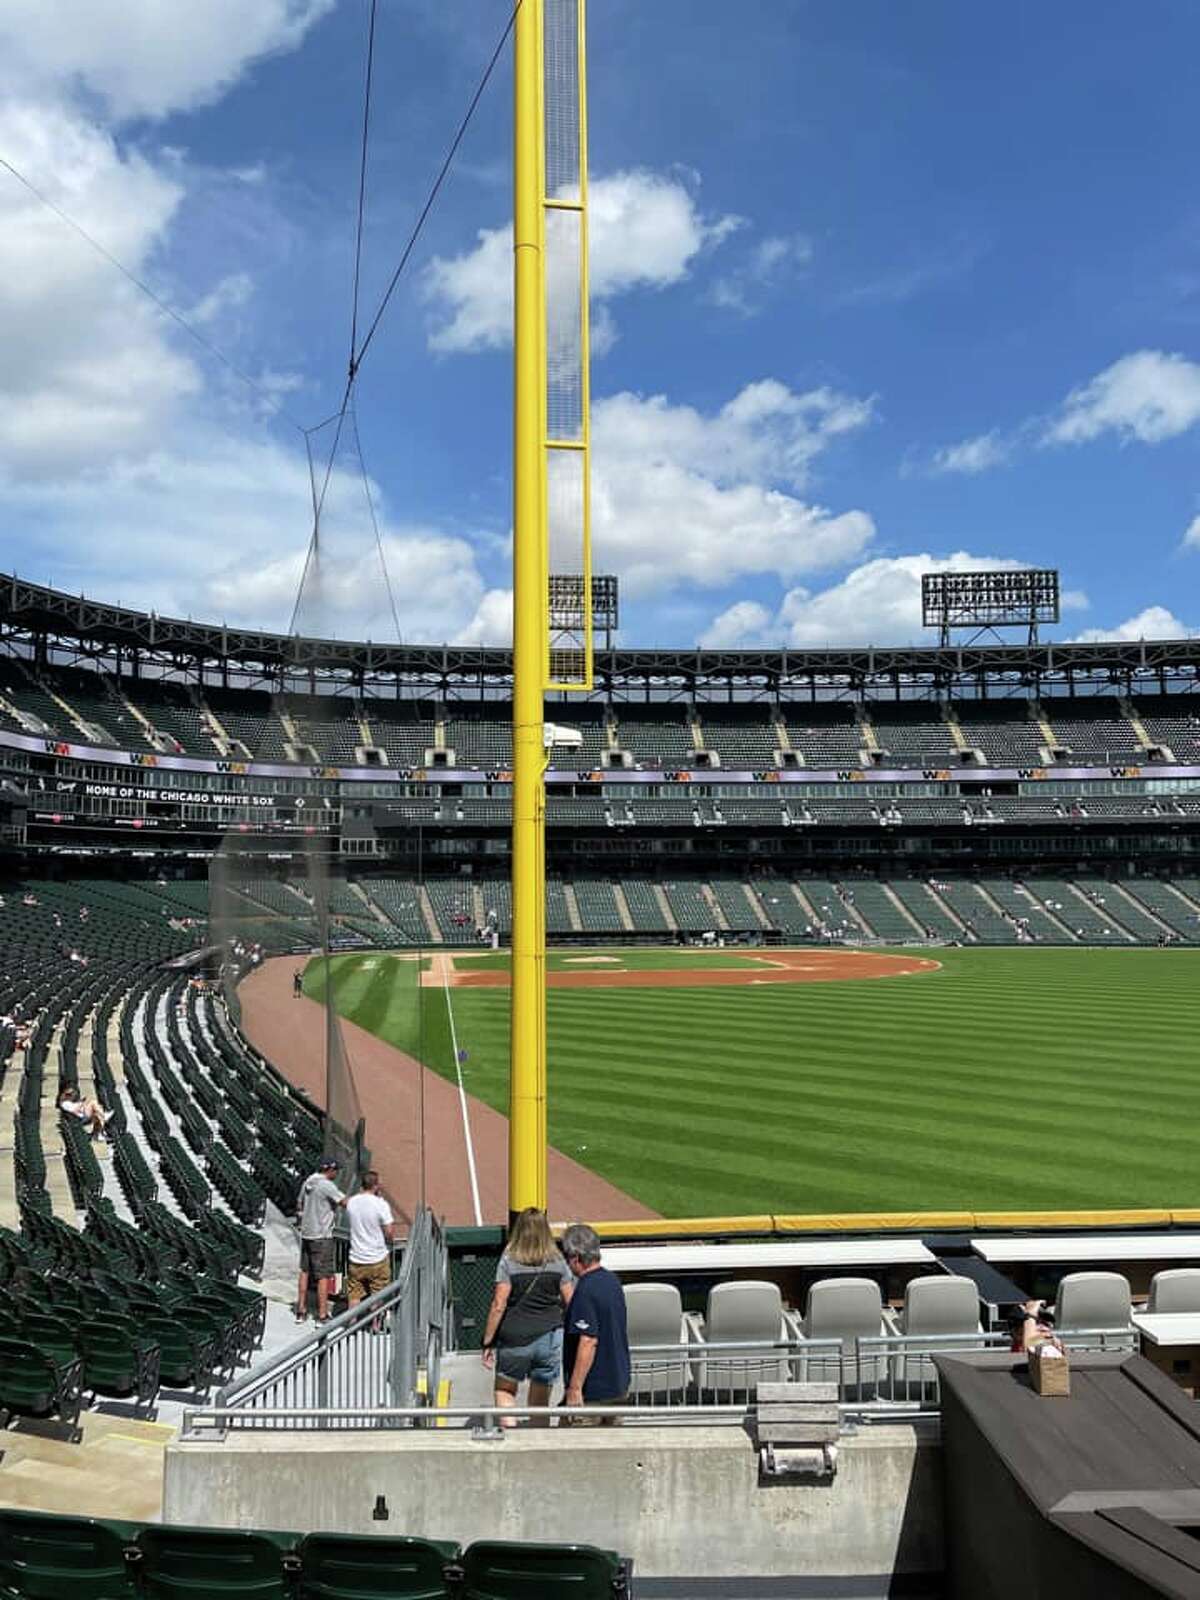 Greene's seat in section 108 at Guaranteed Rate Field in August 2021. The empty stadium could become a reality in April if negotiations are not made.